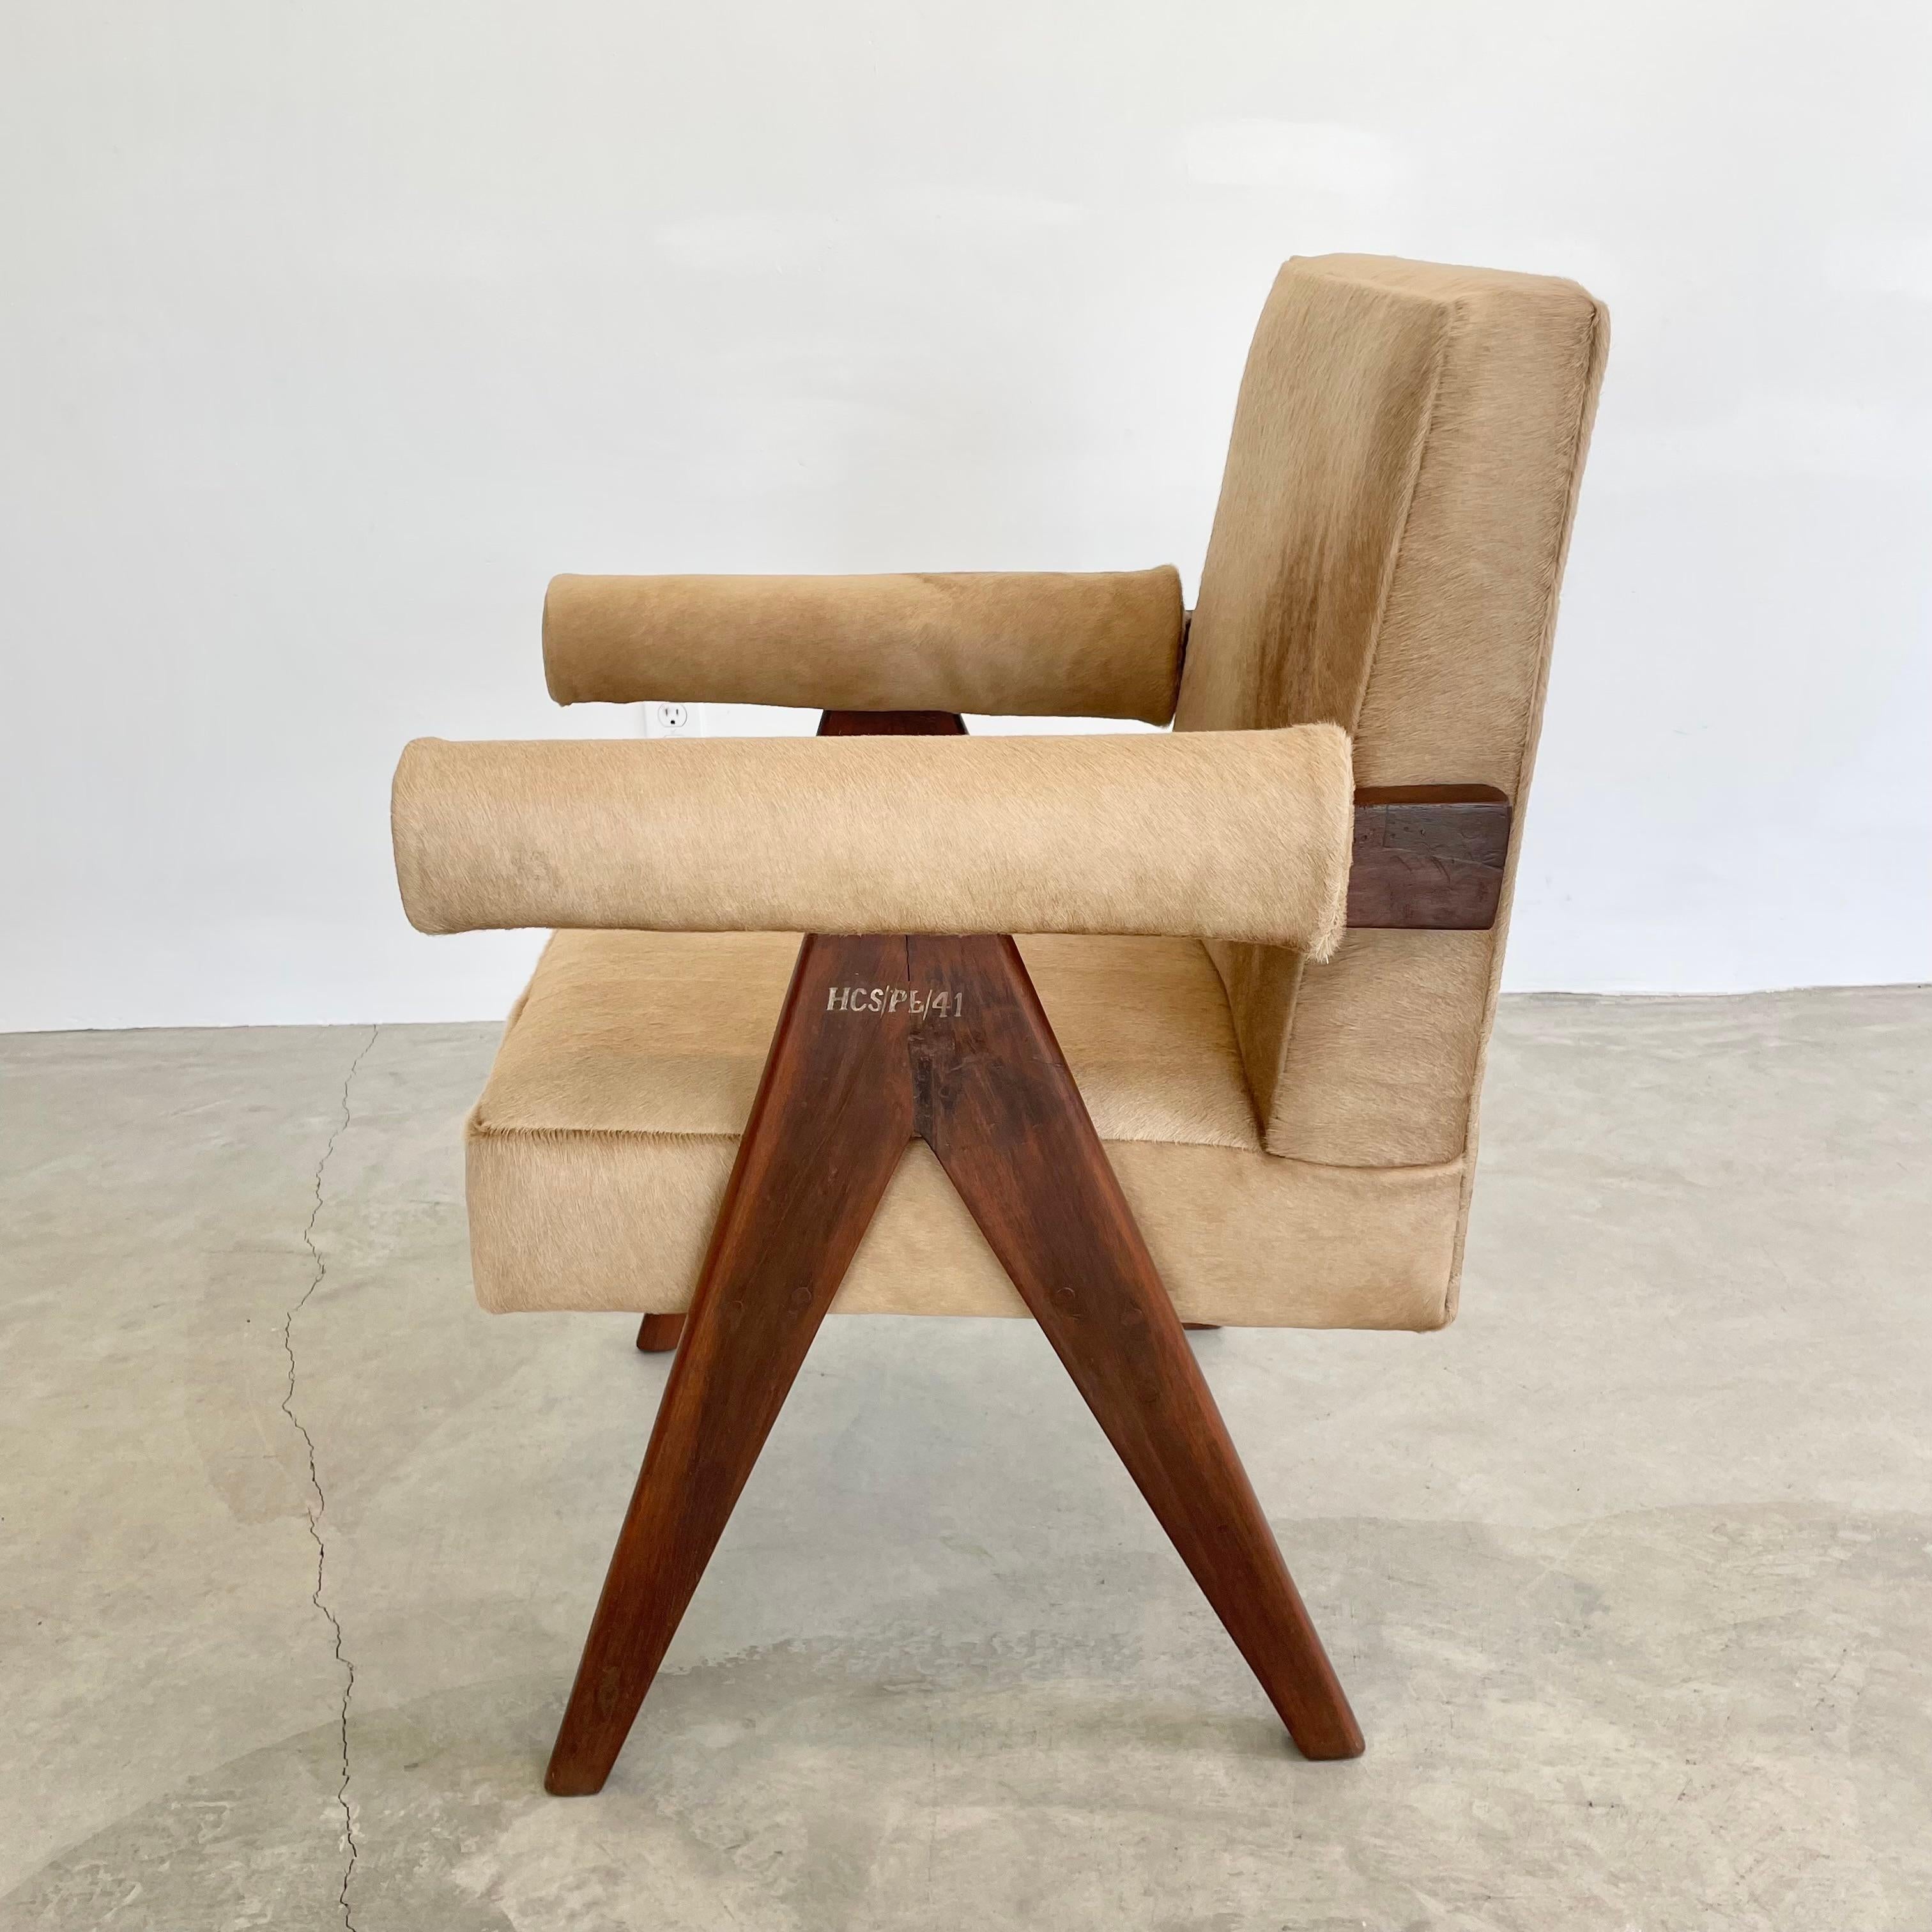 Indian Pierre Jeanneret Senate Chair in Cowhide, 1950s Chandigargh For Sale